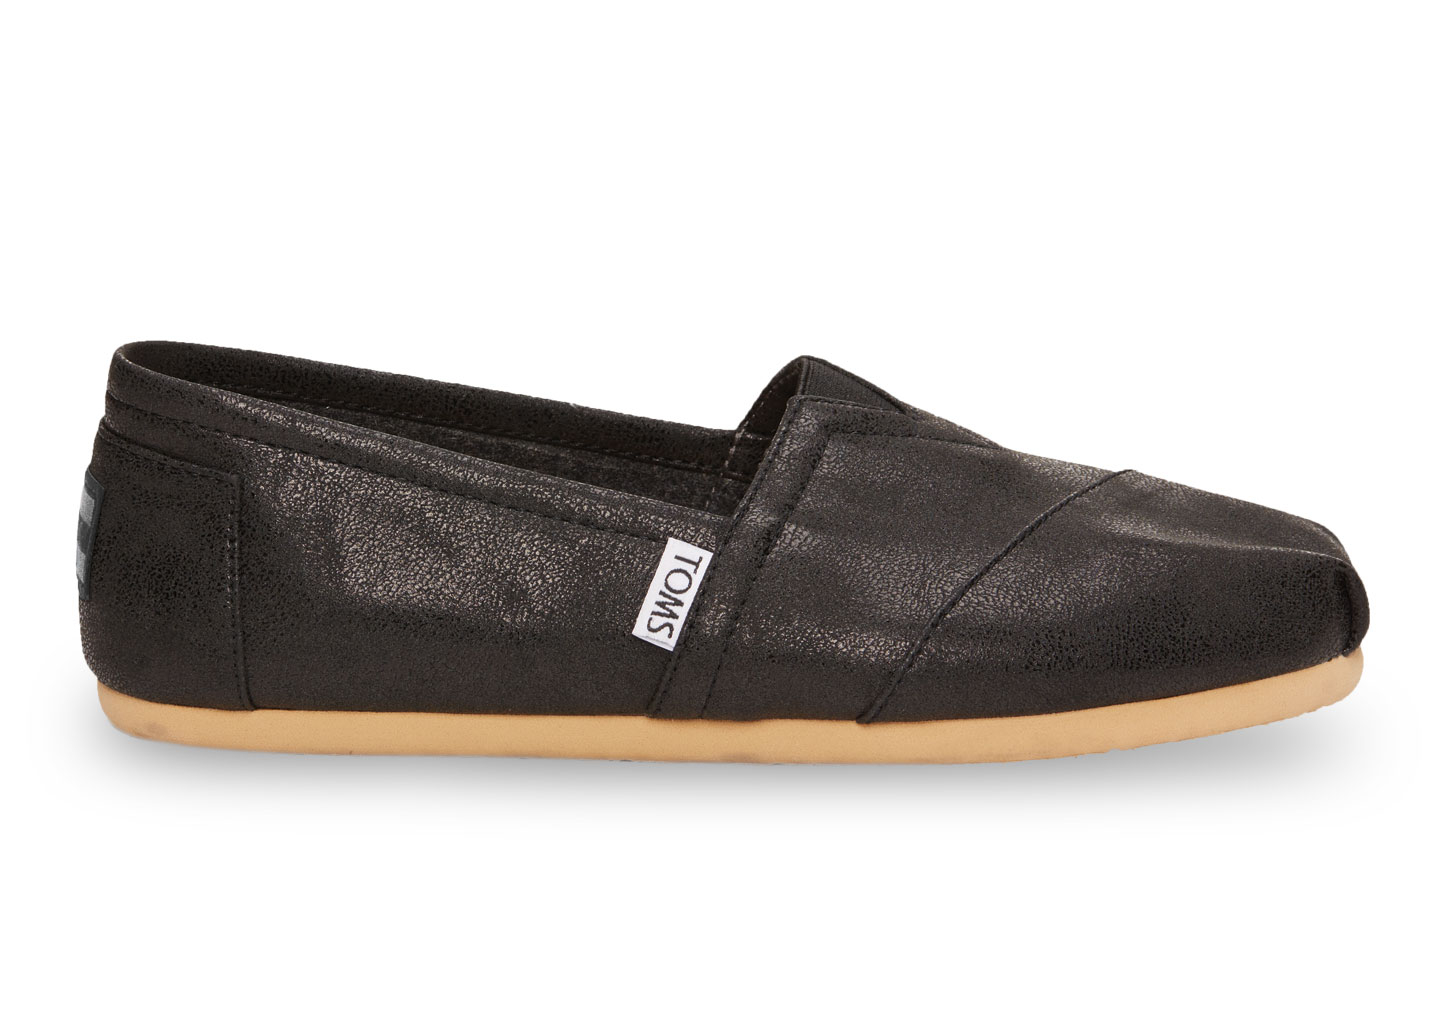 TOMS Black Metallic Synthetic Leather 